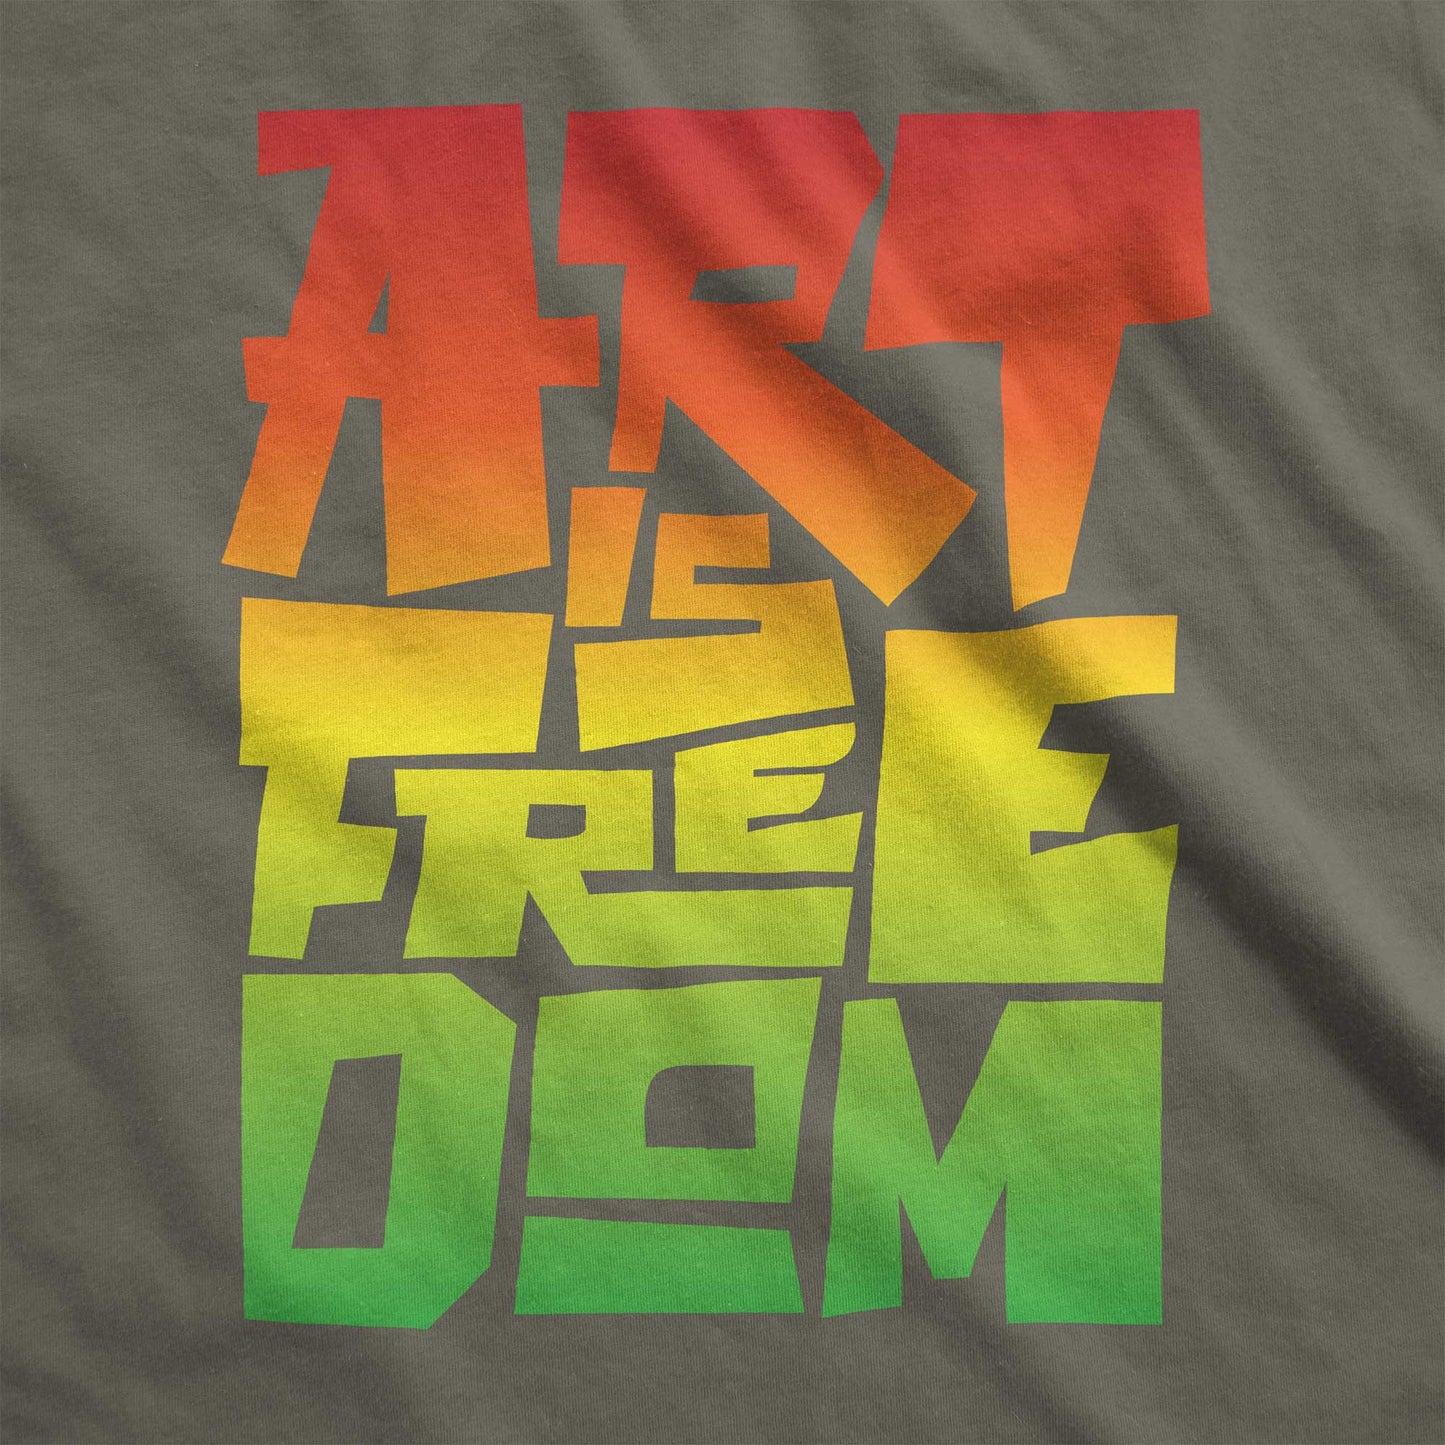 An army green Bella Canvas swatch that says art is freedom in a red, yellow and green gradient.